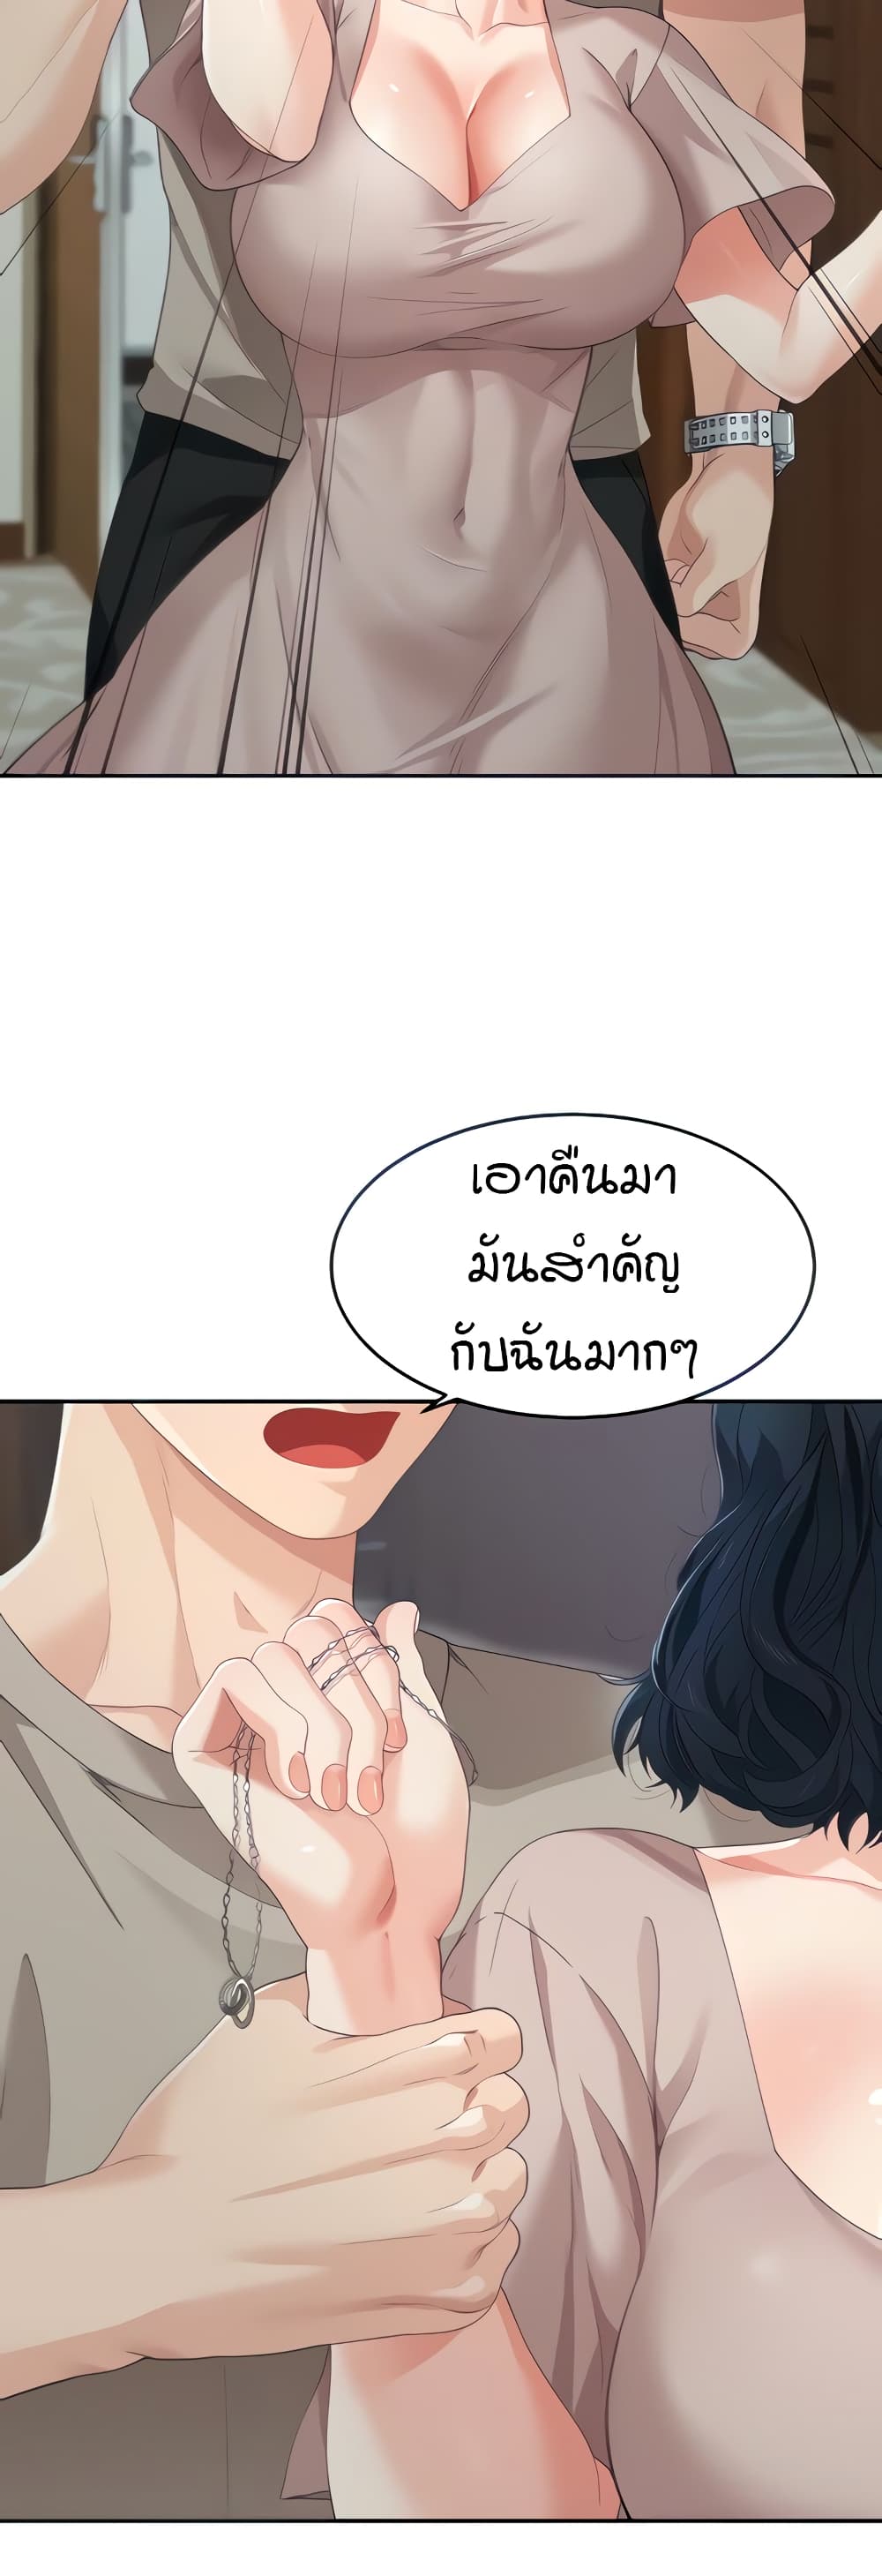 Is It Your Mother or Sister? ตอนที่ 5 ภาพ 13